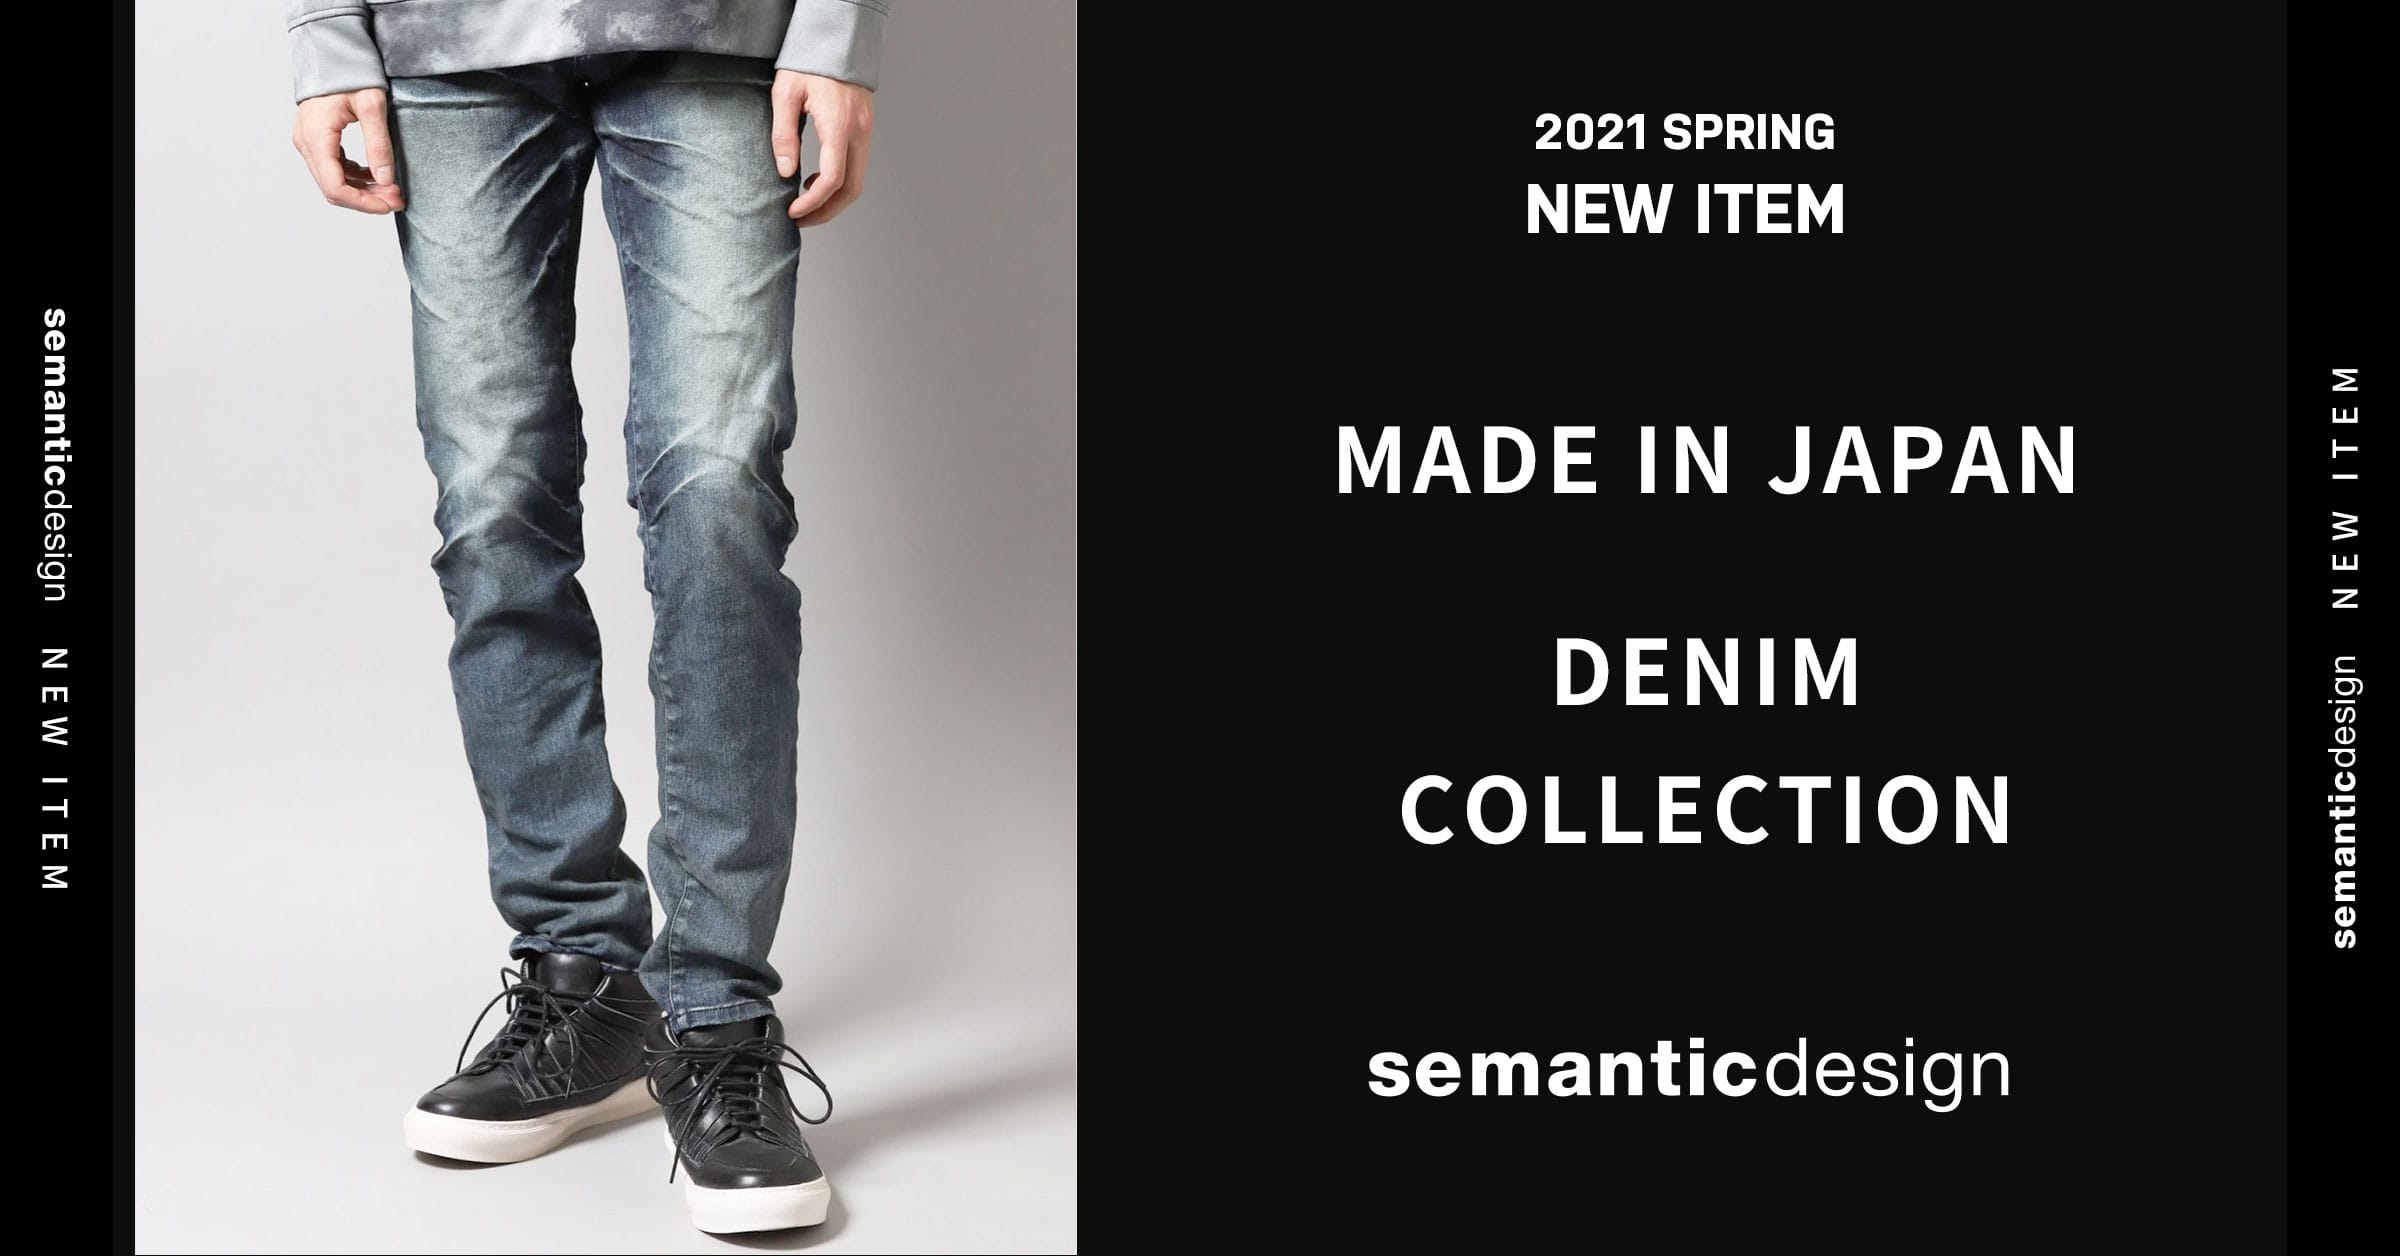  MADE IN JAPAN DENIM COLLECTION